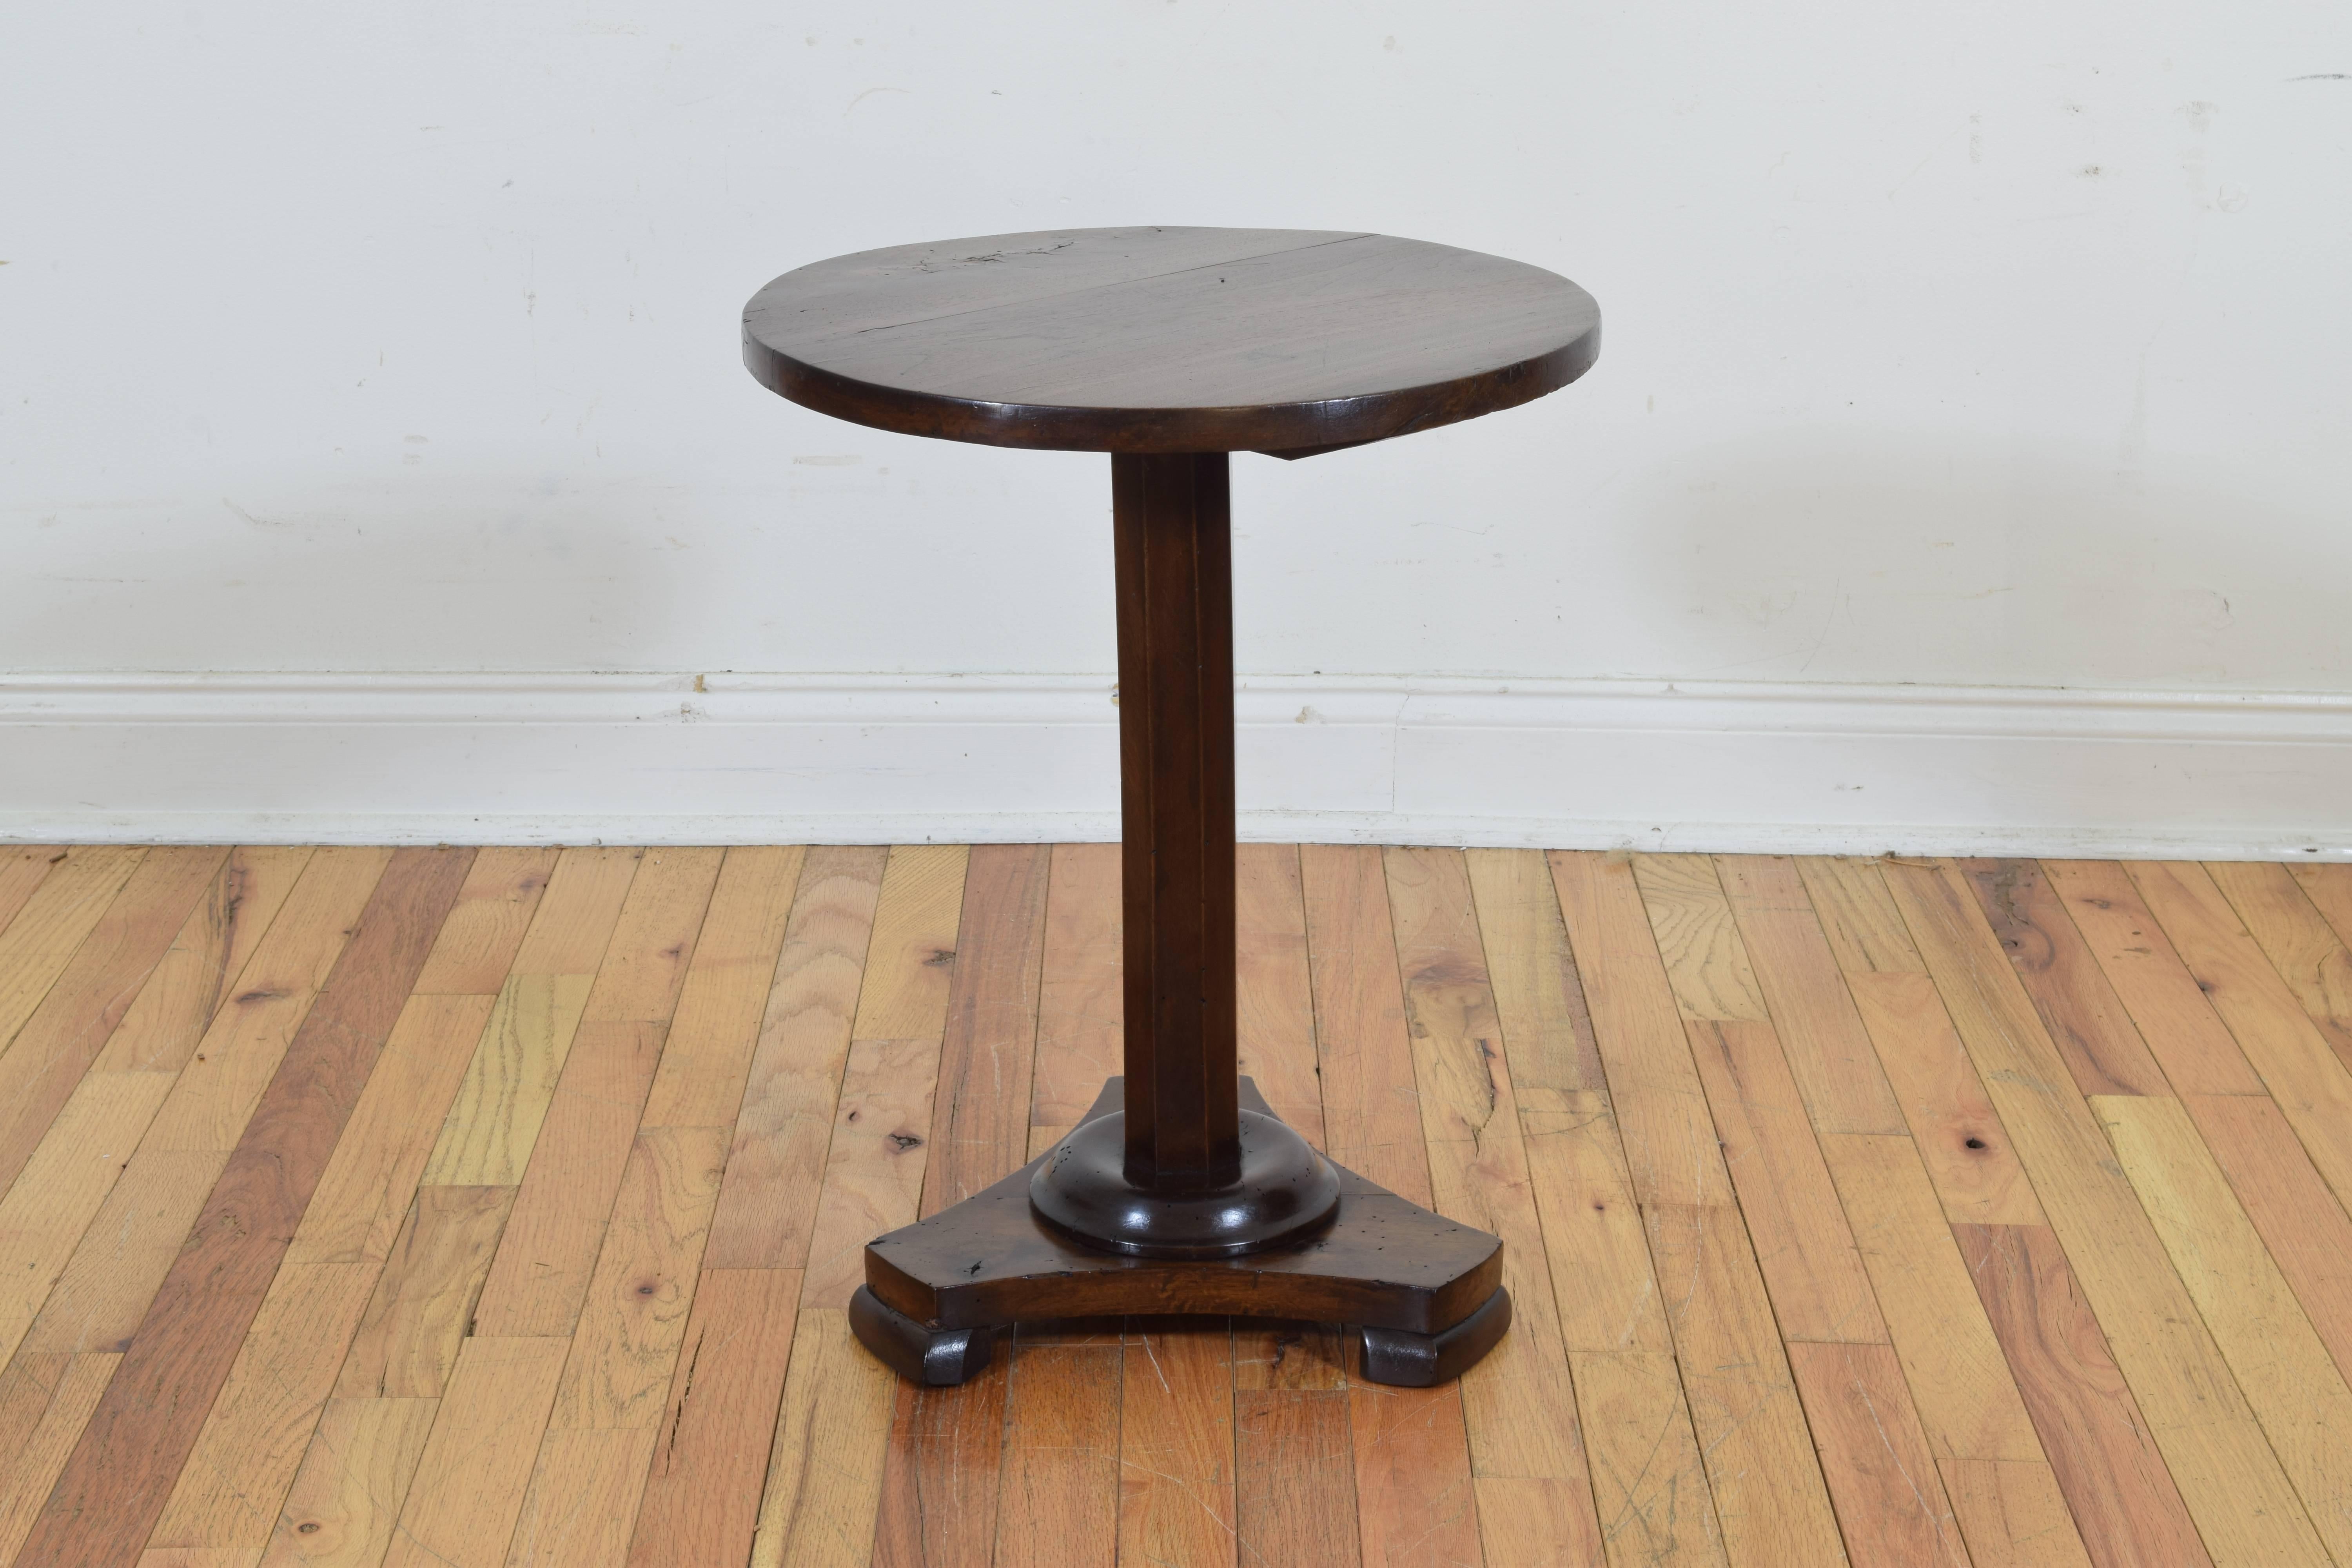 Neoclassical Italian Neoclassic Walnut Side Table, Second Quarter of the 19th Century